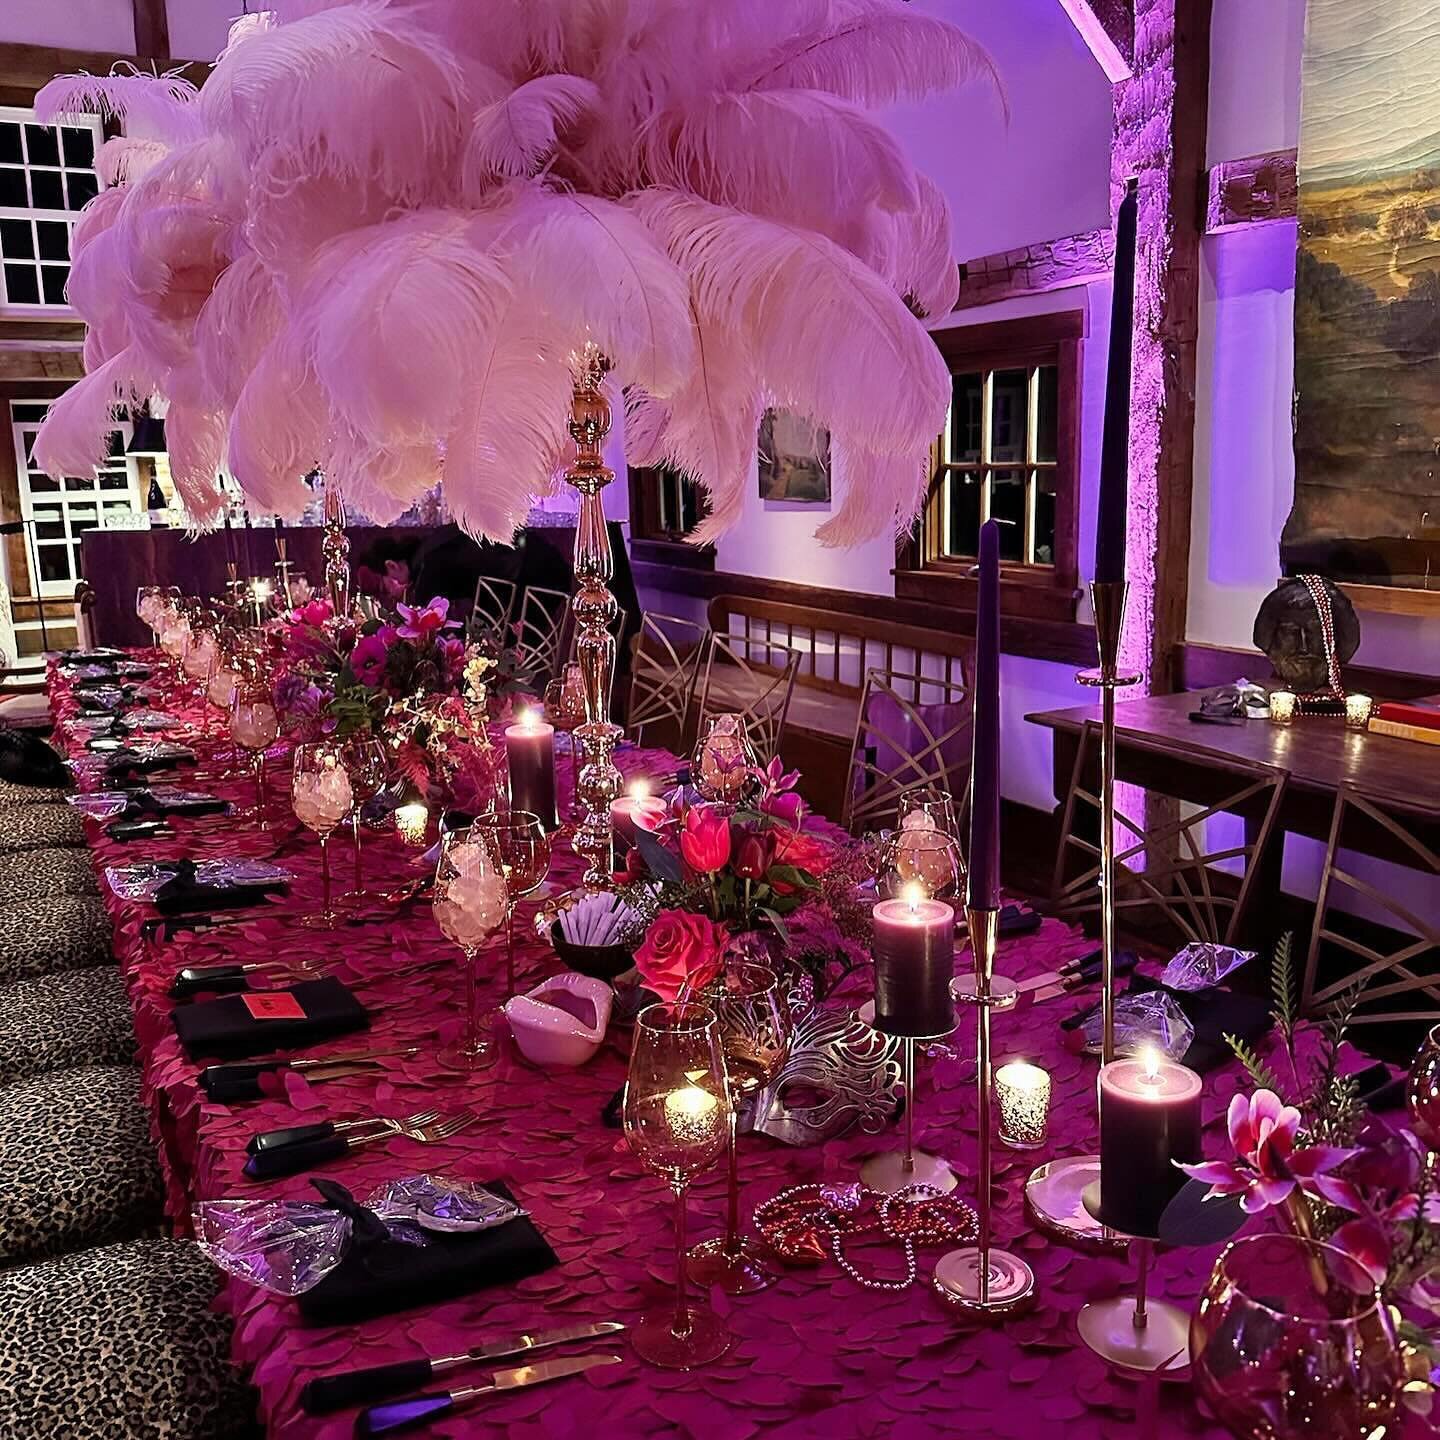 Valentines x Mardi Gras all tied in one! ❤️💞💜💋Planning and Styling @lamaisonfete Catering @portagefoods Custom Mask Cookies @ishysbakeshop Florals @wildfigfloral Plumes @exceptionalpartyrental Lighting @spectrumeventlighting DJ @soundkeen Band @ba